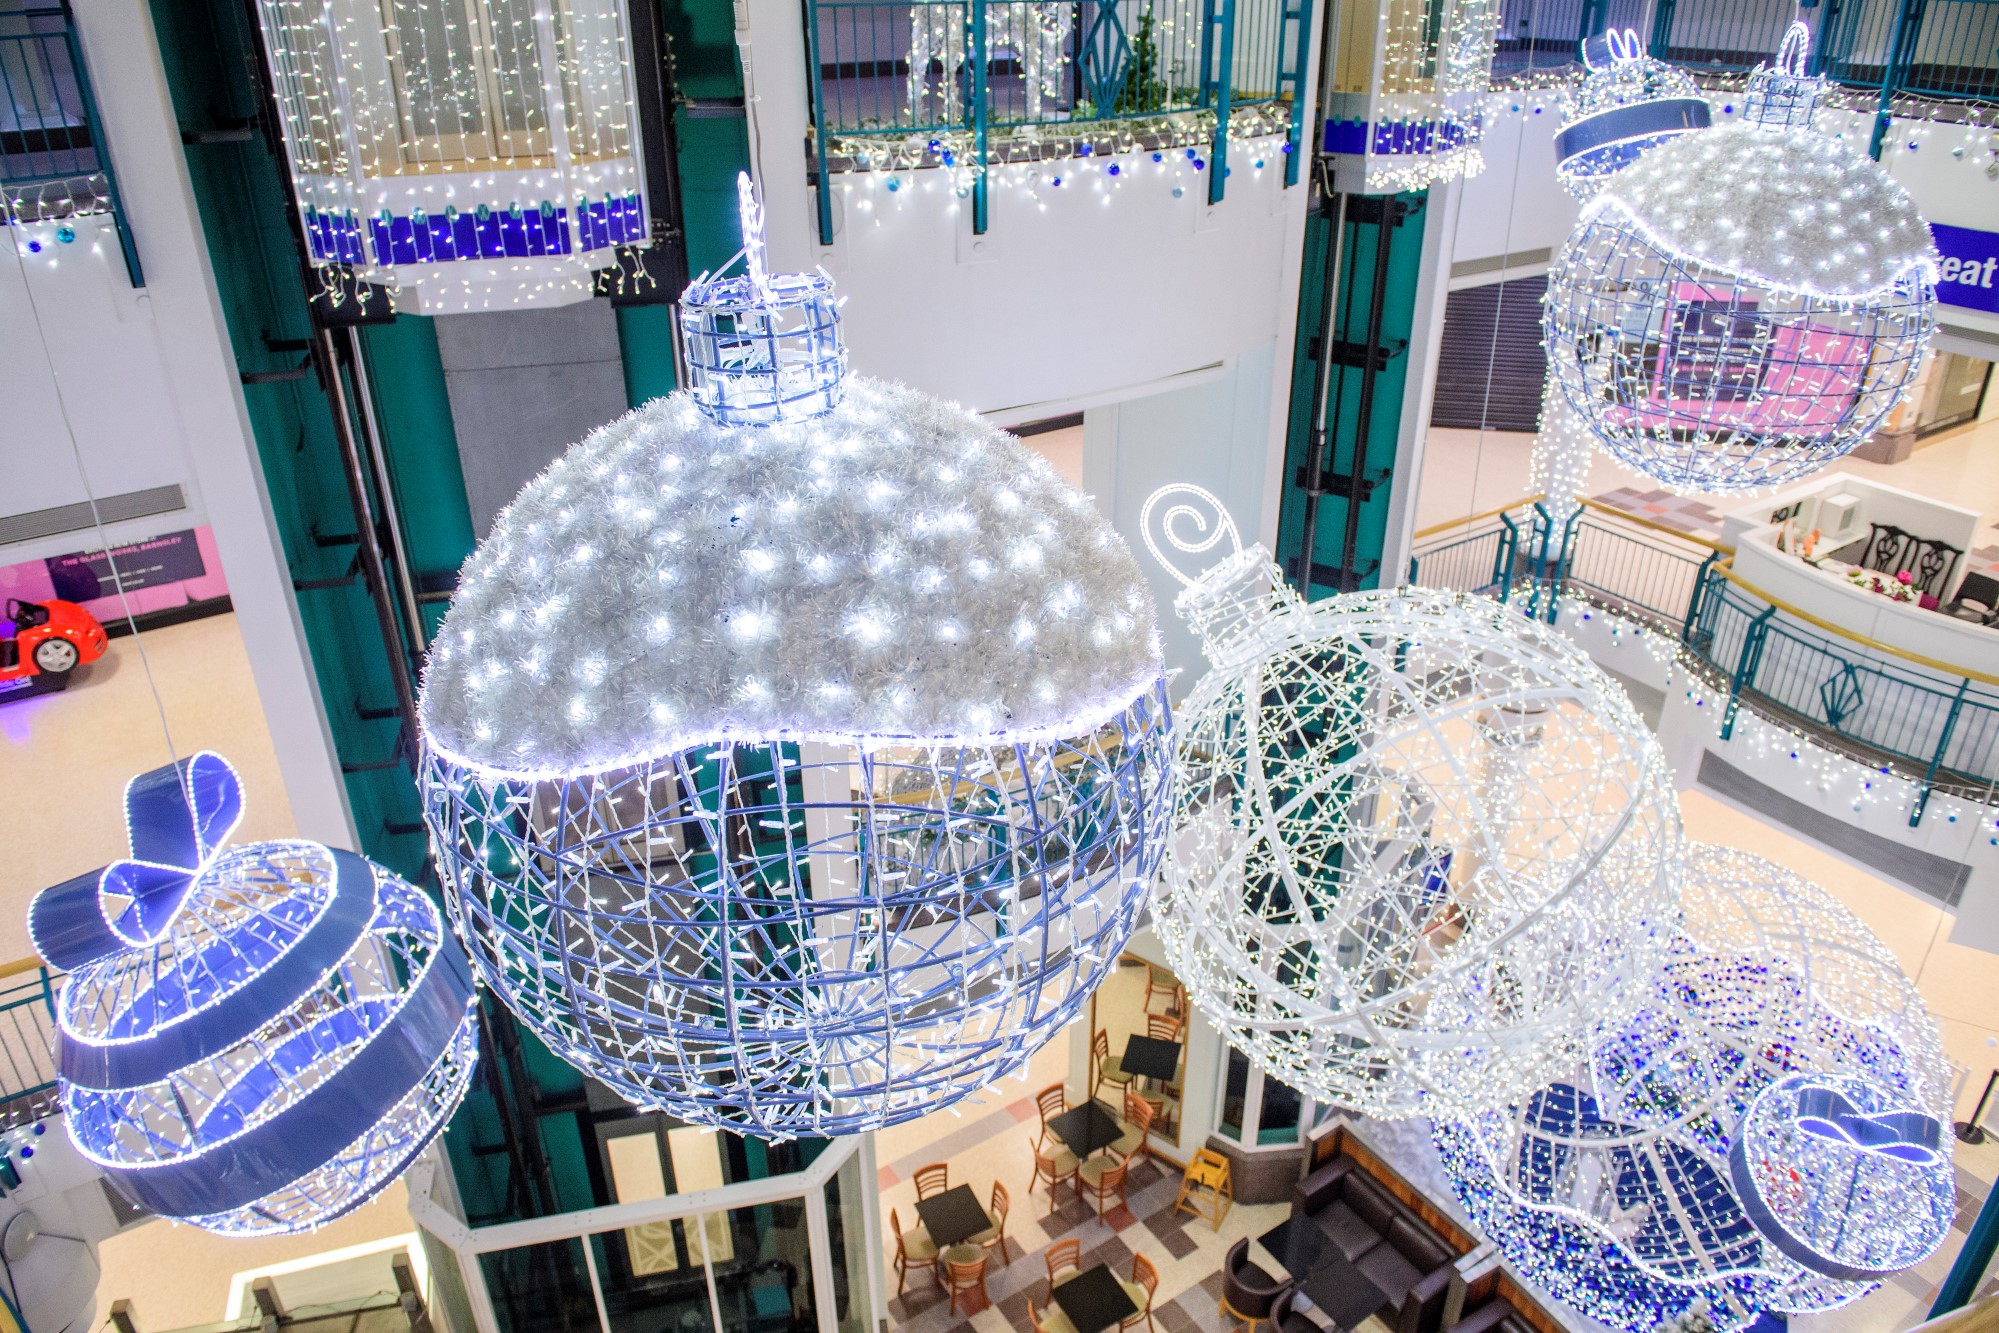 Giant 3D sphere hanging in shopping centre. Including bright white Christmas lights and blue disc garland. 